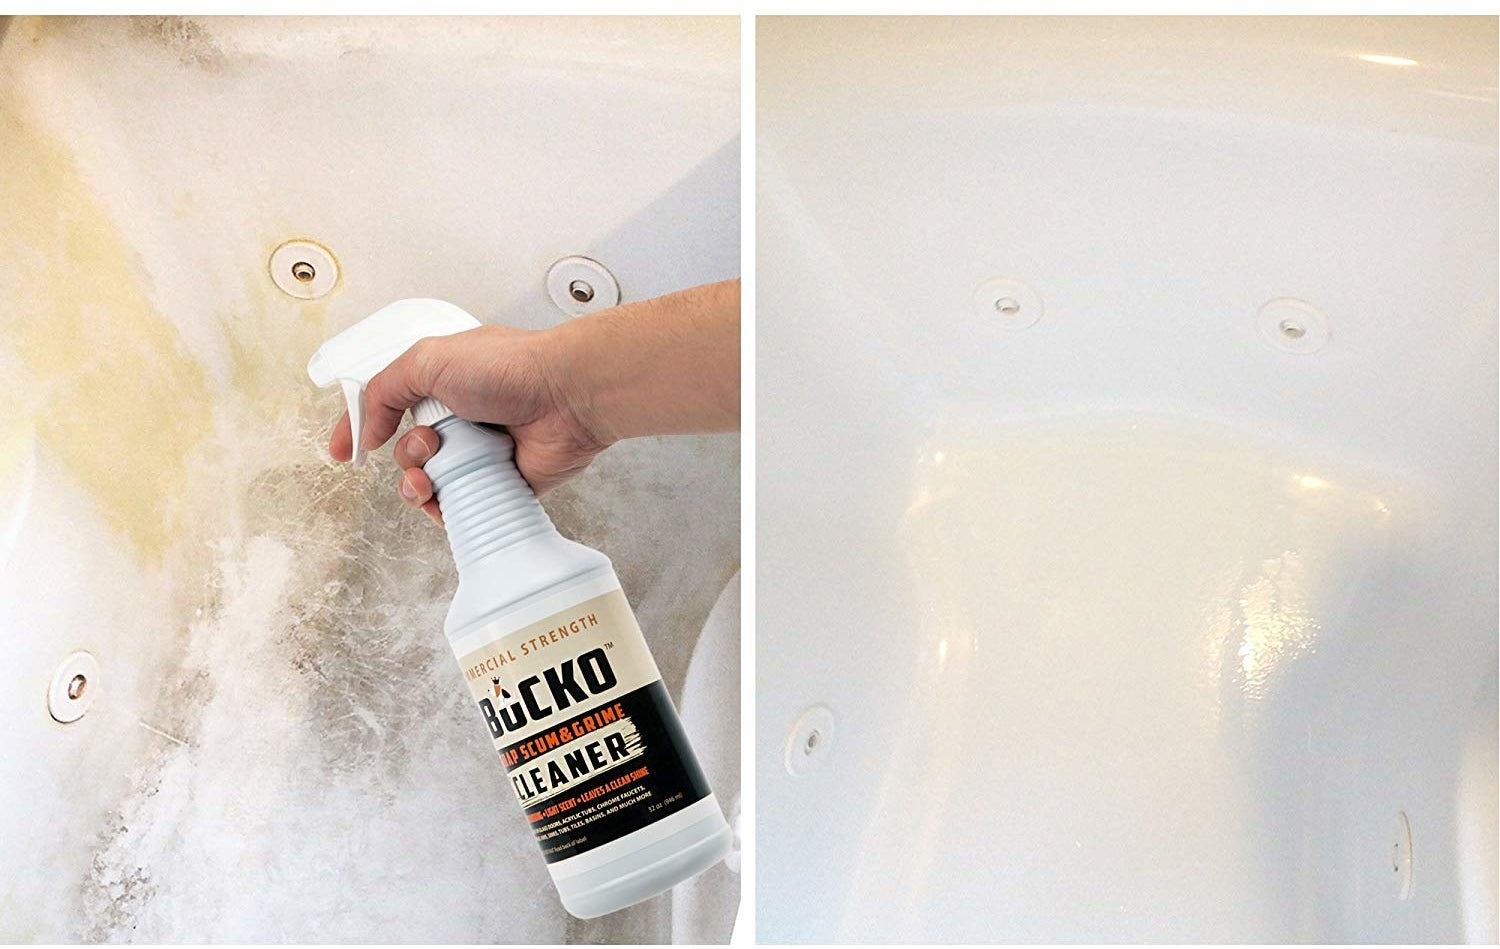 On the left, a hand spraying the product on a grimy bathtub. On the right, the tub looking shiny and clean